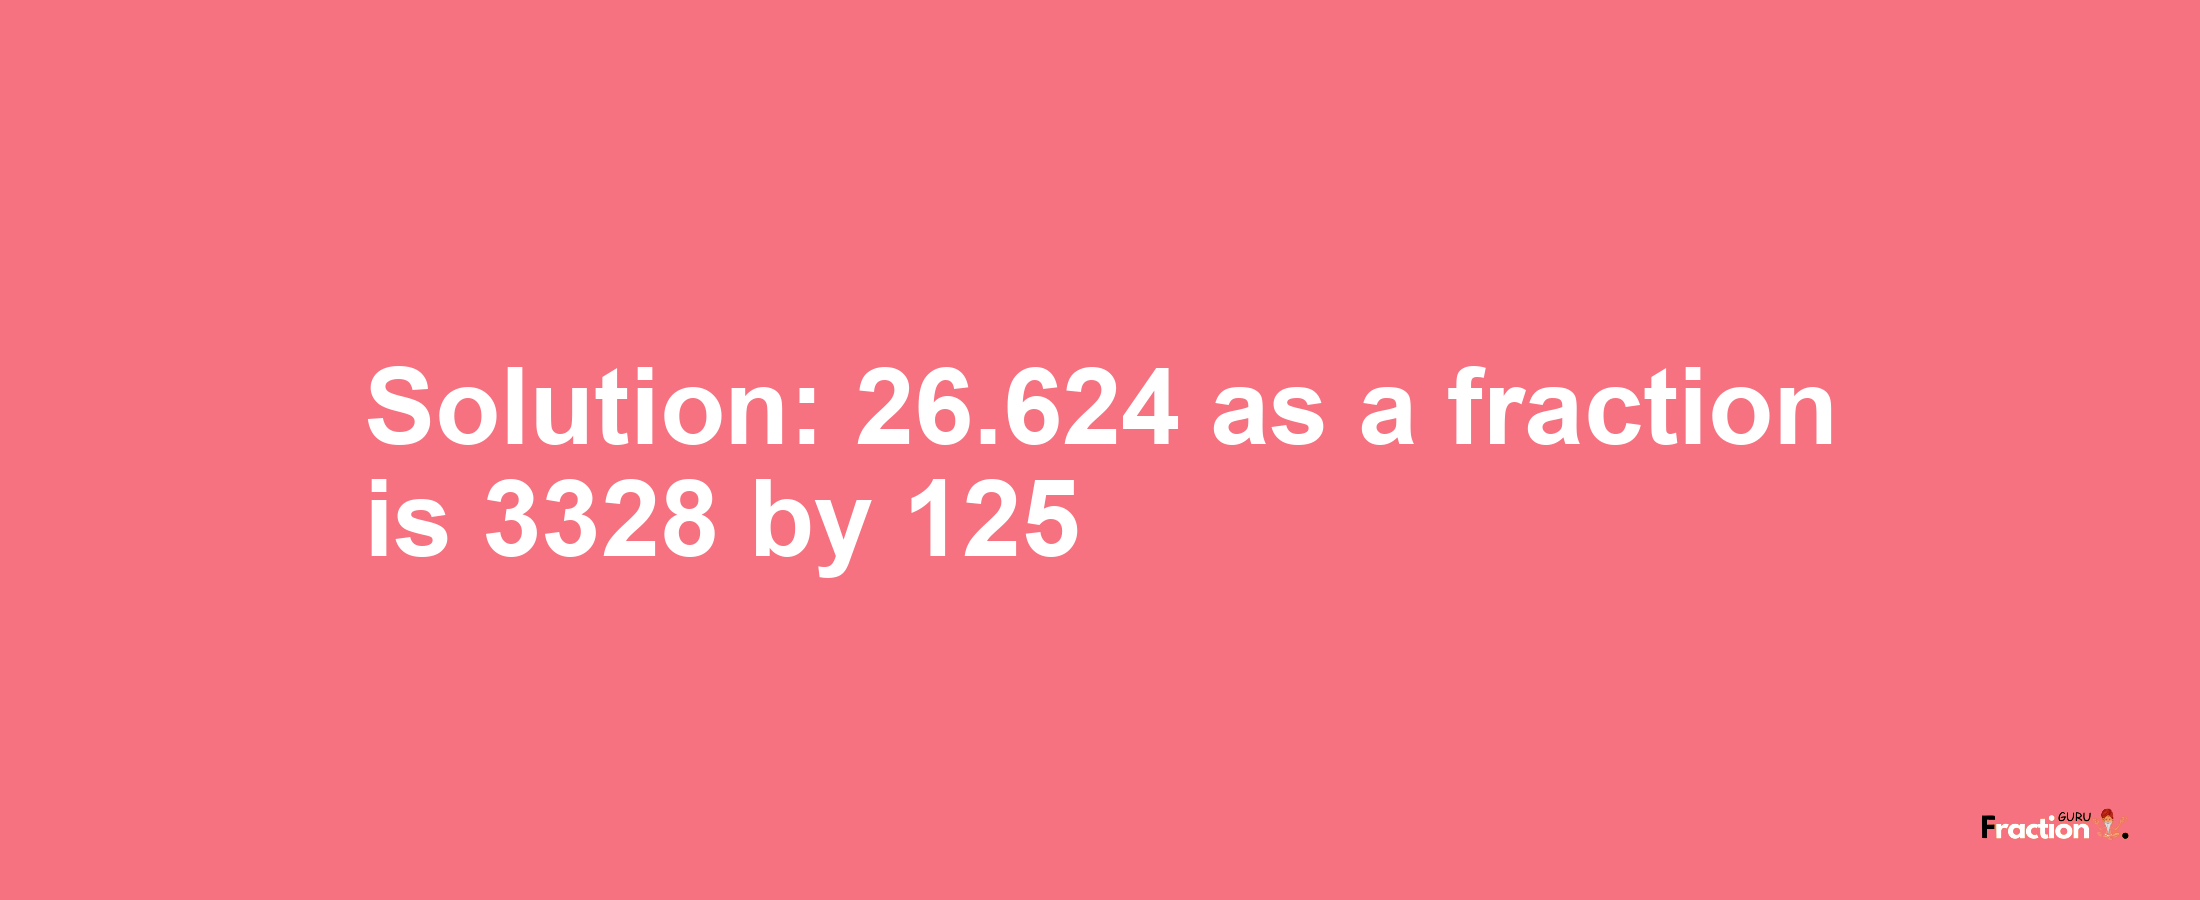 Solution:26.624 as a fraction is 3328/125